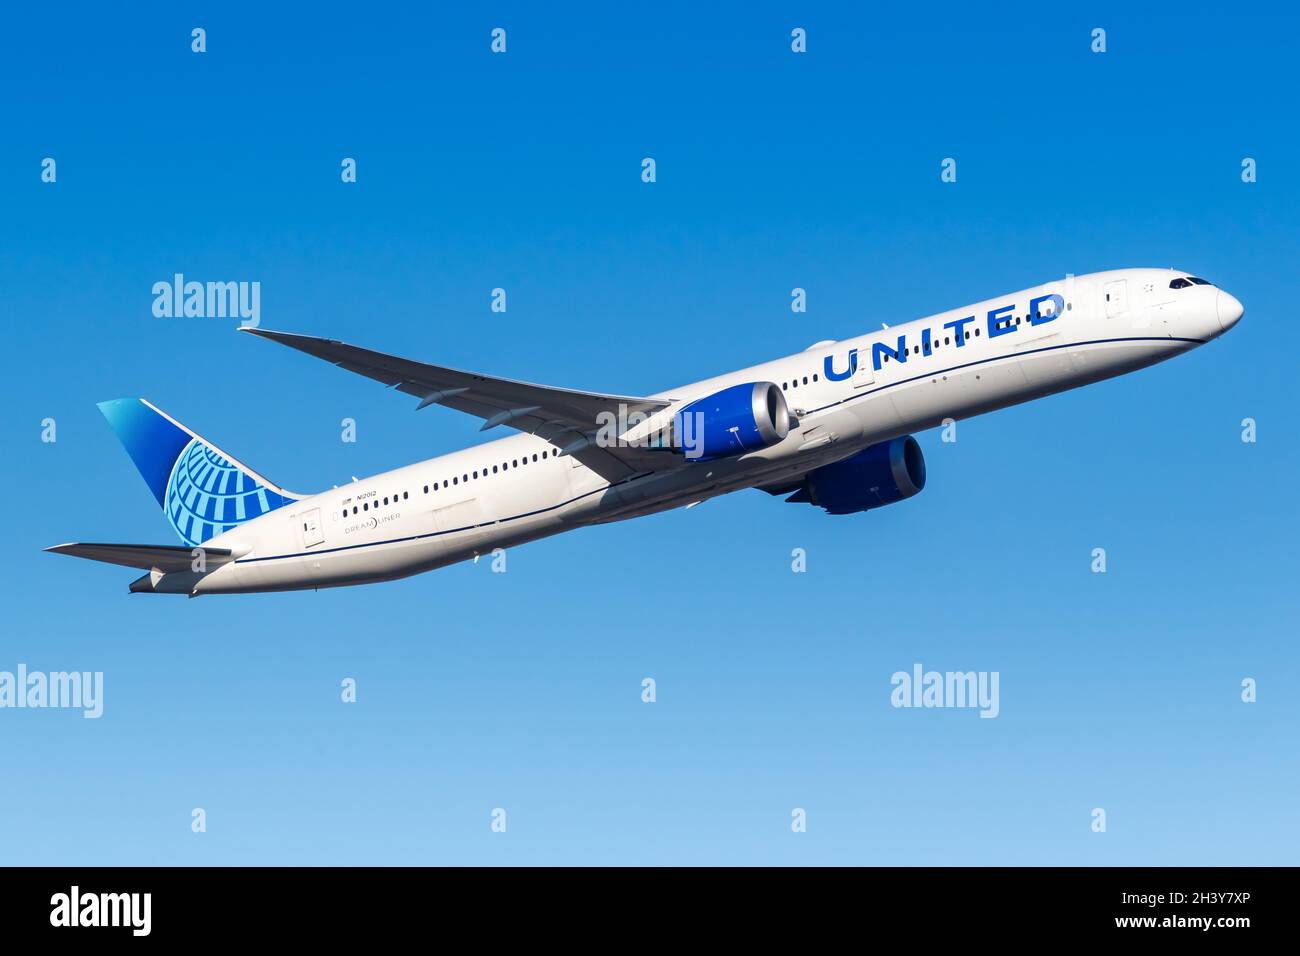 United Airlines Boeing 787-10 Dreamliner aircraft Frankfurt Airport in Germany Stock Photo